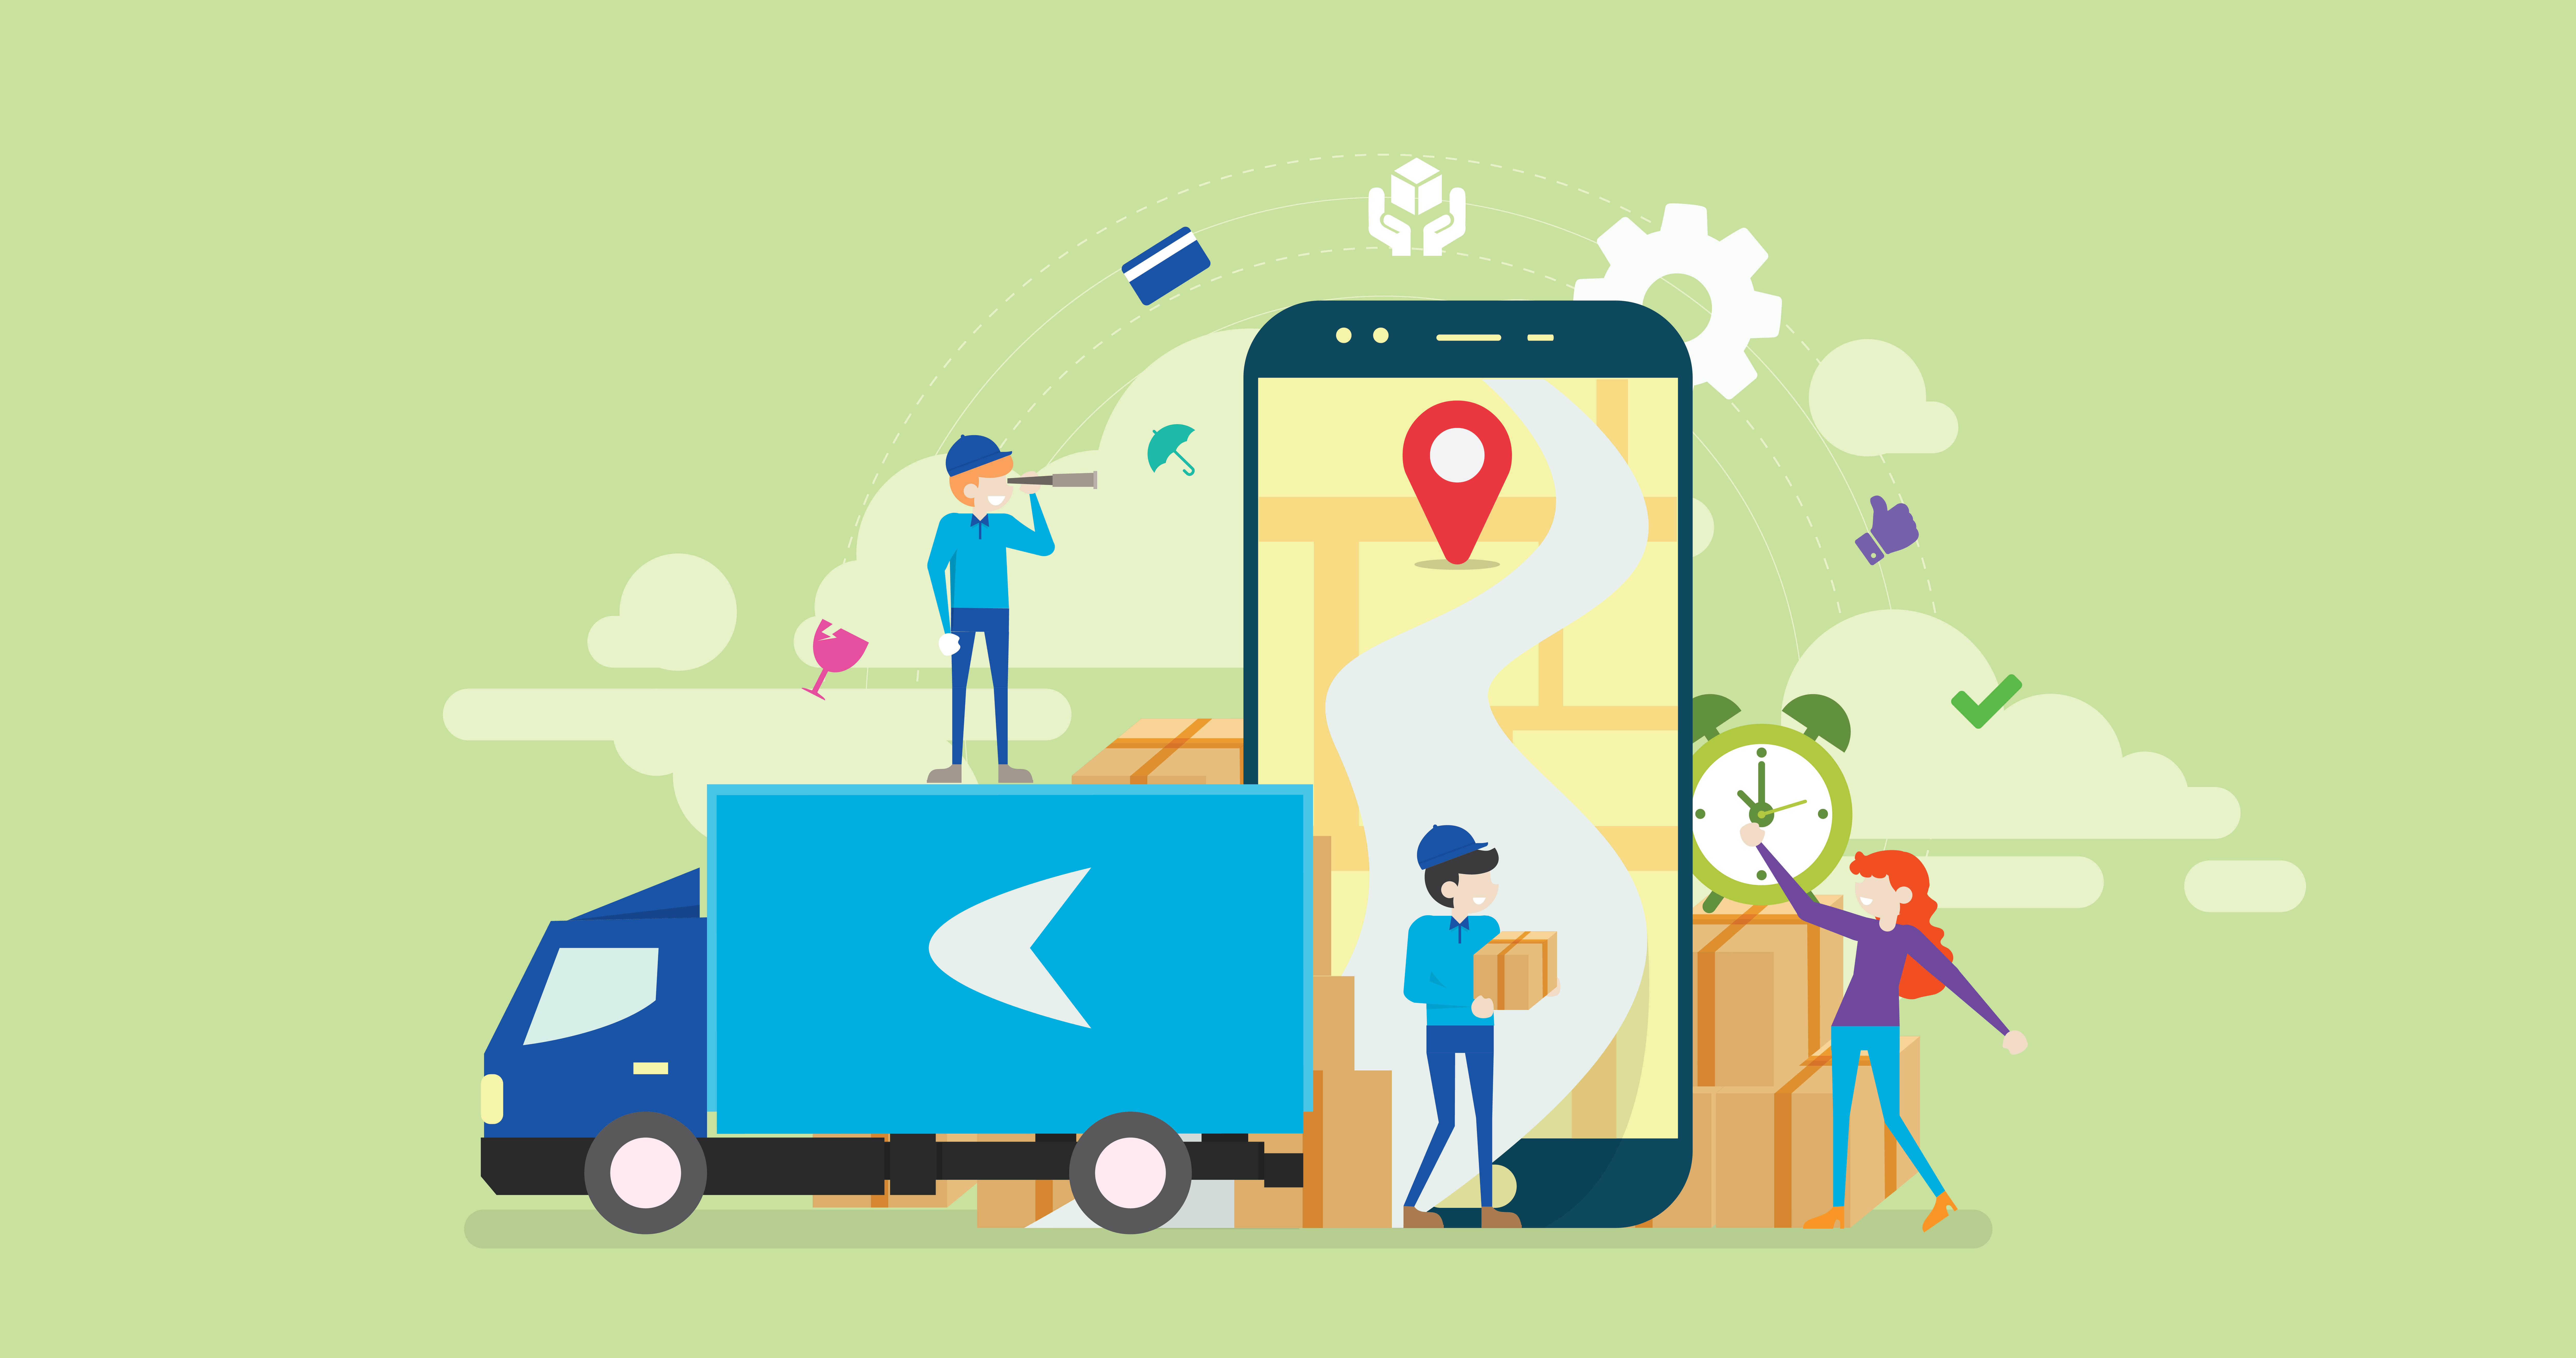 An open future: The Entry of Super App Marketplace in the delivery industry | Jugnoo